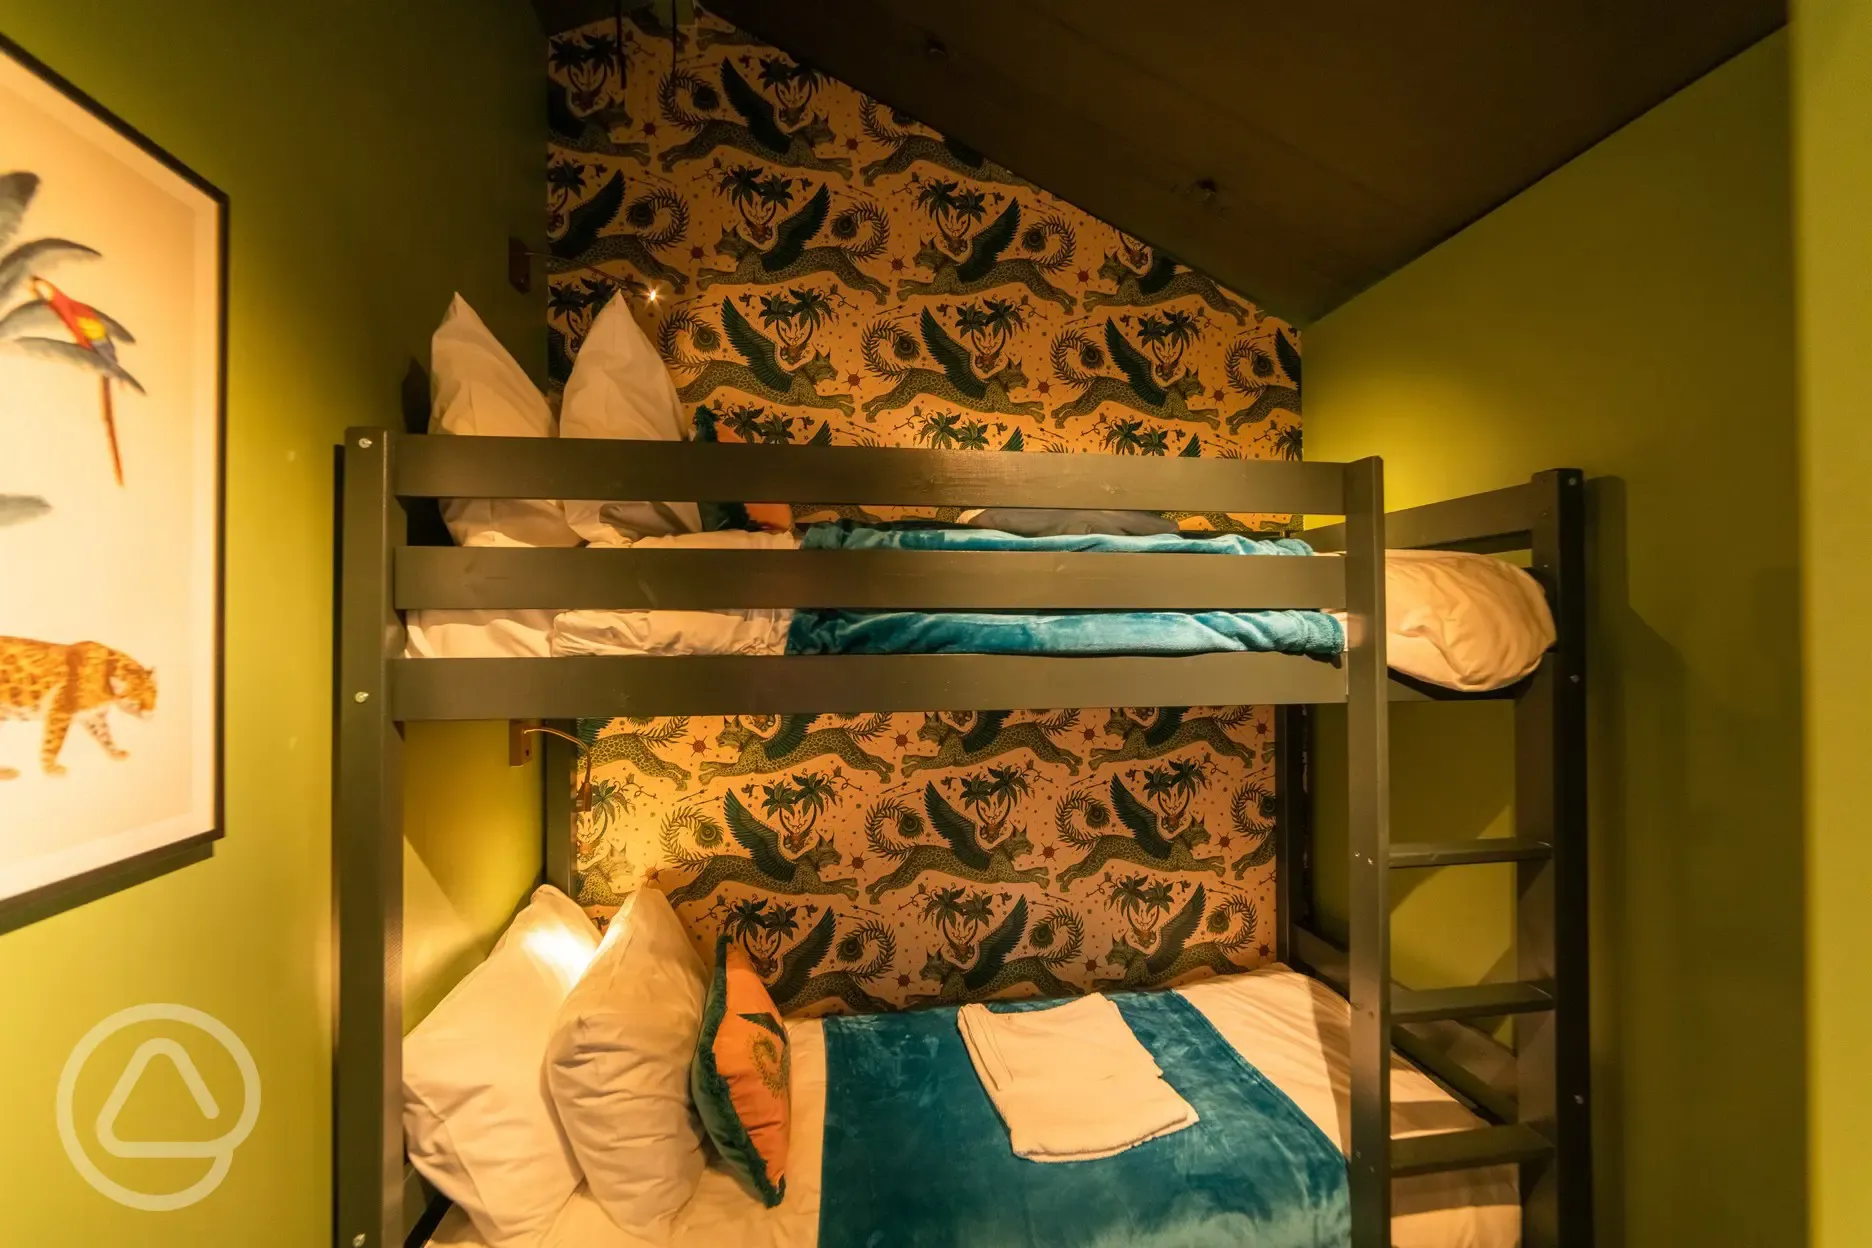 Heavy duty bunk beds suitable for both adults and children